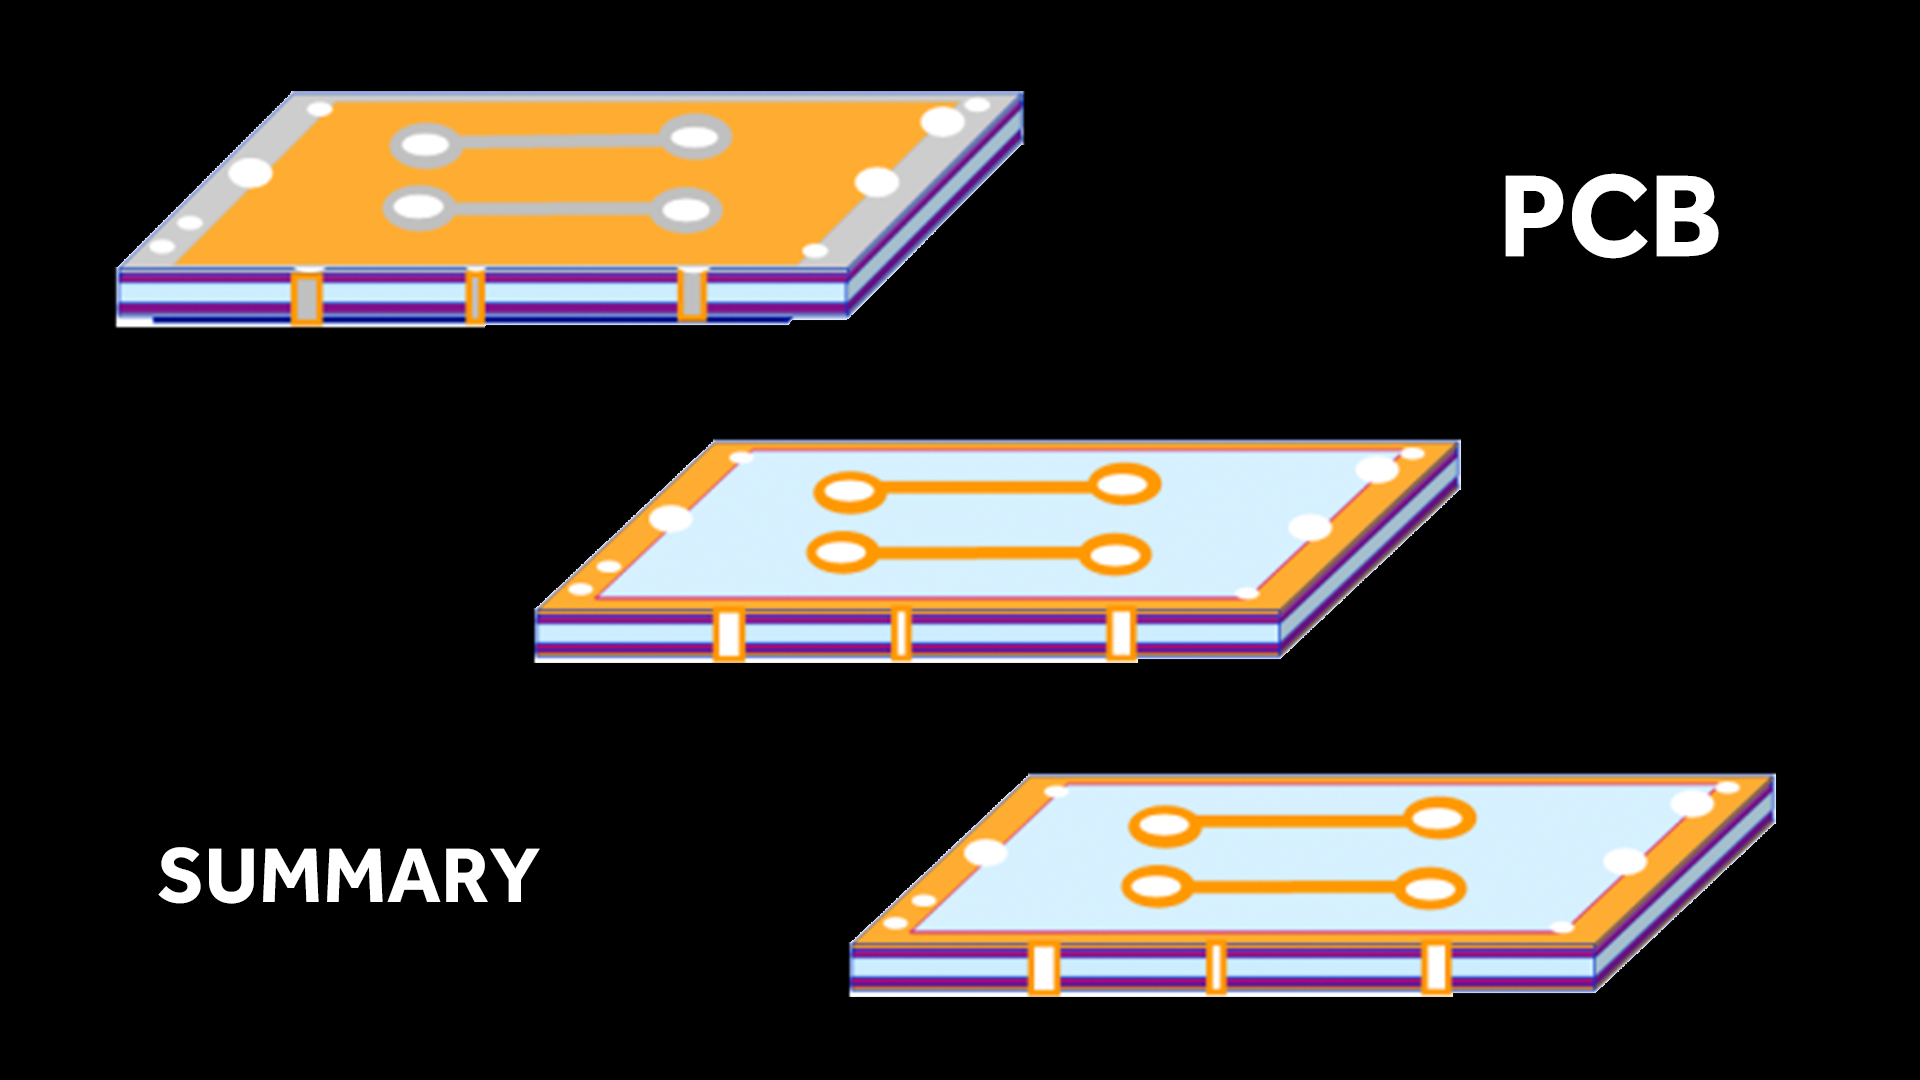 Quality LED Display PCB Board and Summary PCB Knowledge